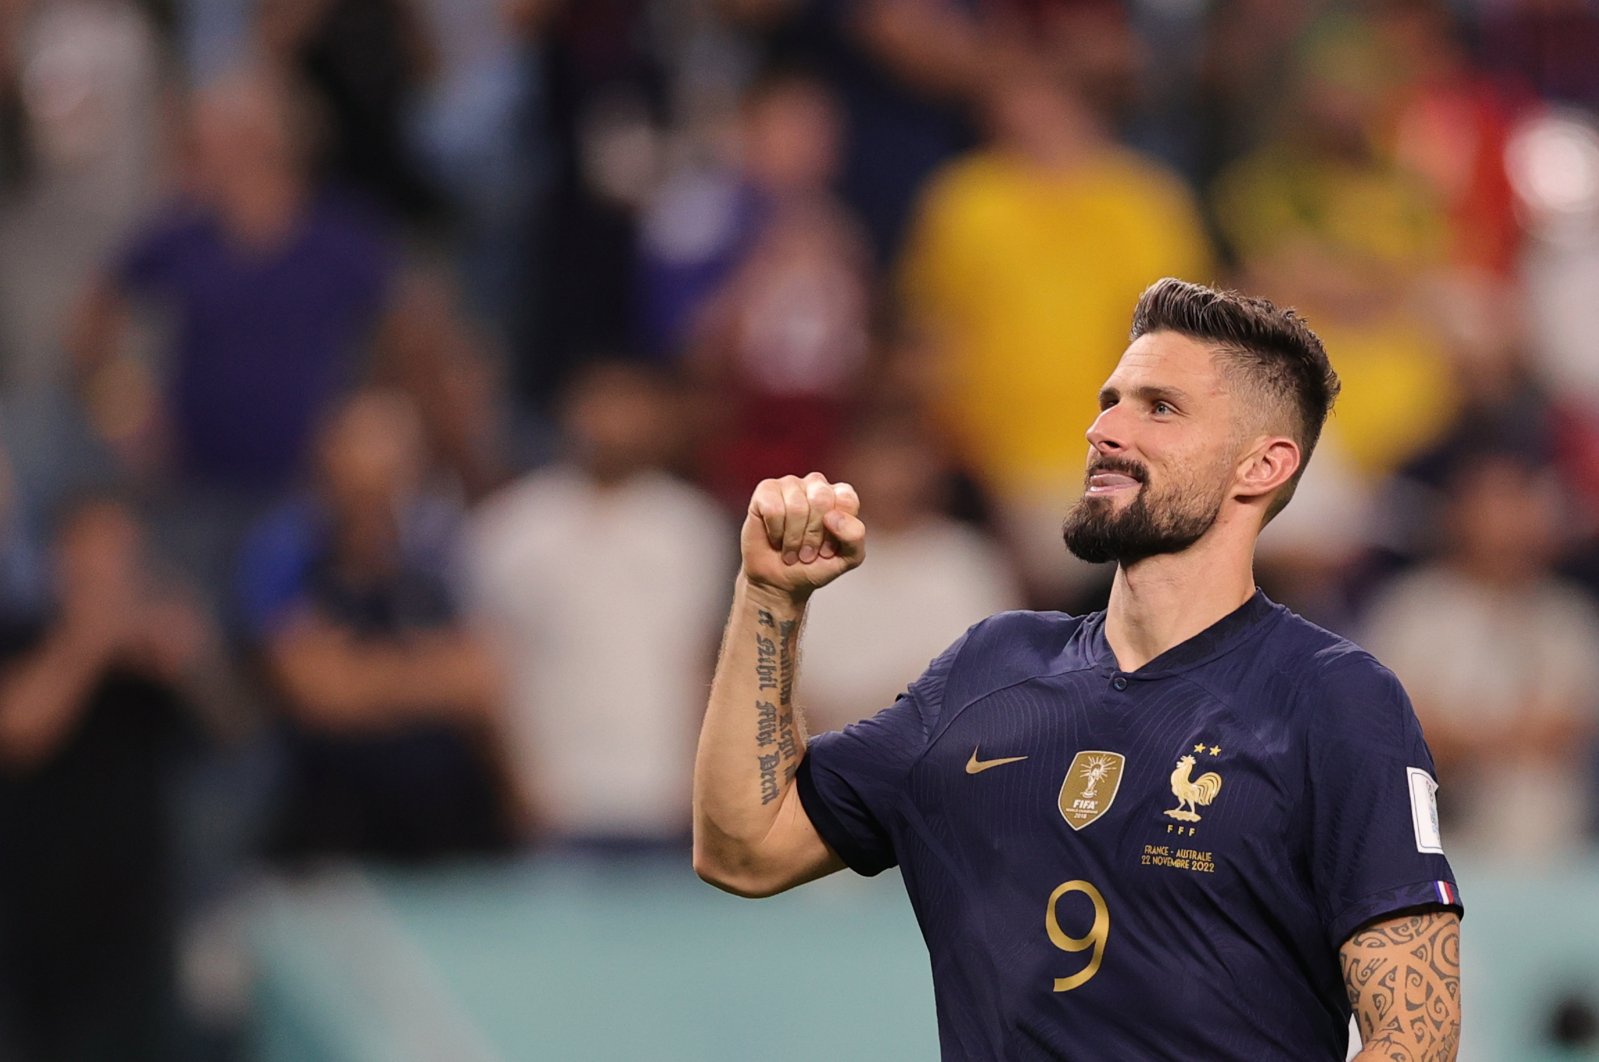 Olivier Giroud of France reacts after the FIFA World Cup 2022 Group D match between France and Australia at Al Janoub Stadium, Al-Wakrah, Qatar, Nov. 22 2022. (EPA Photo)